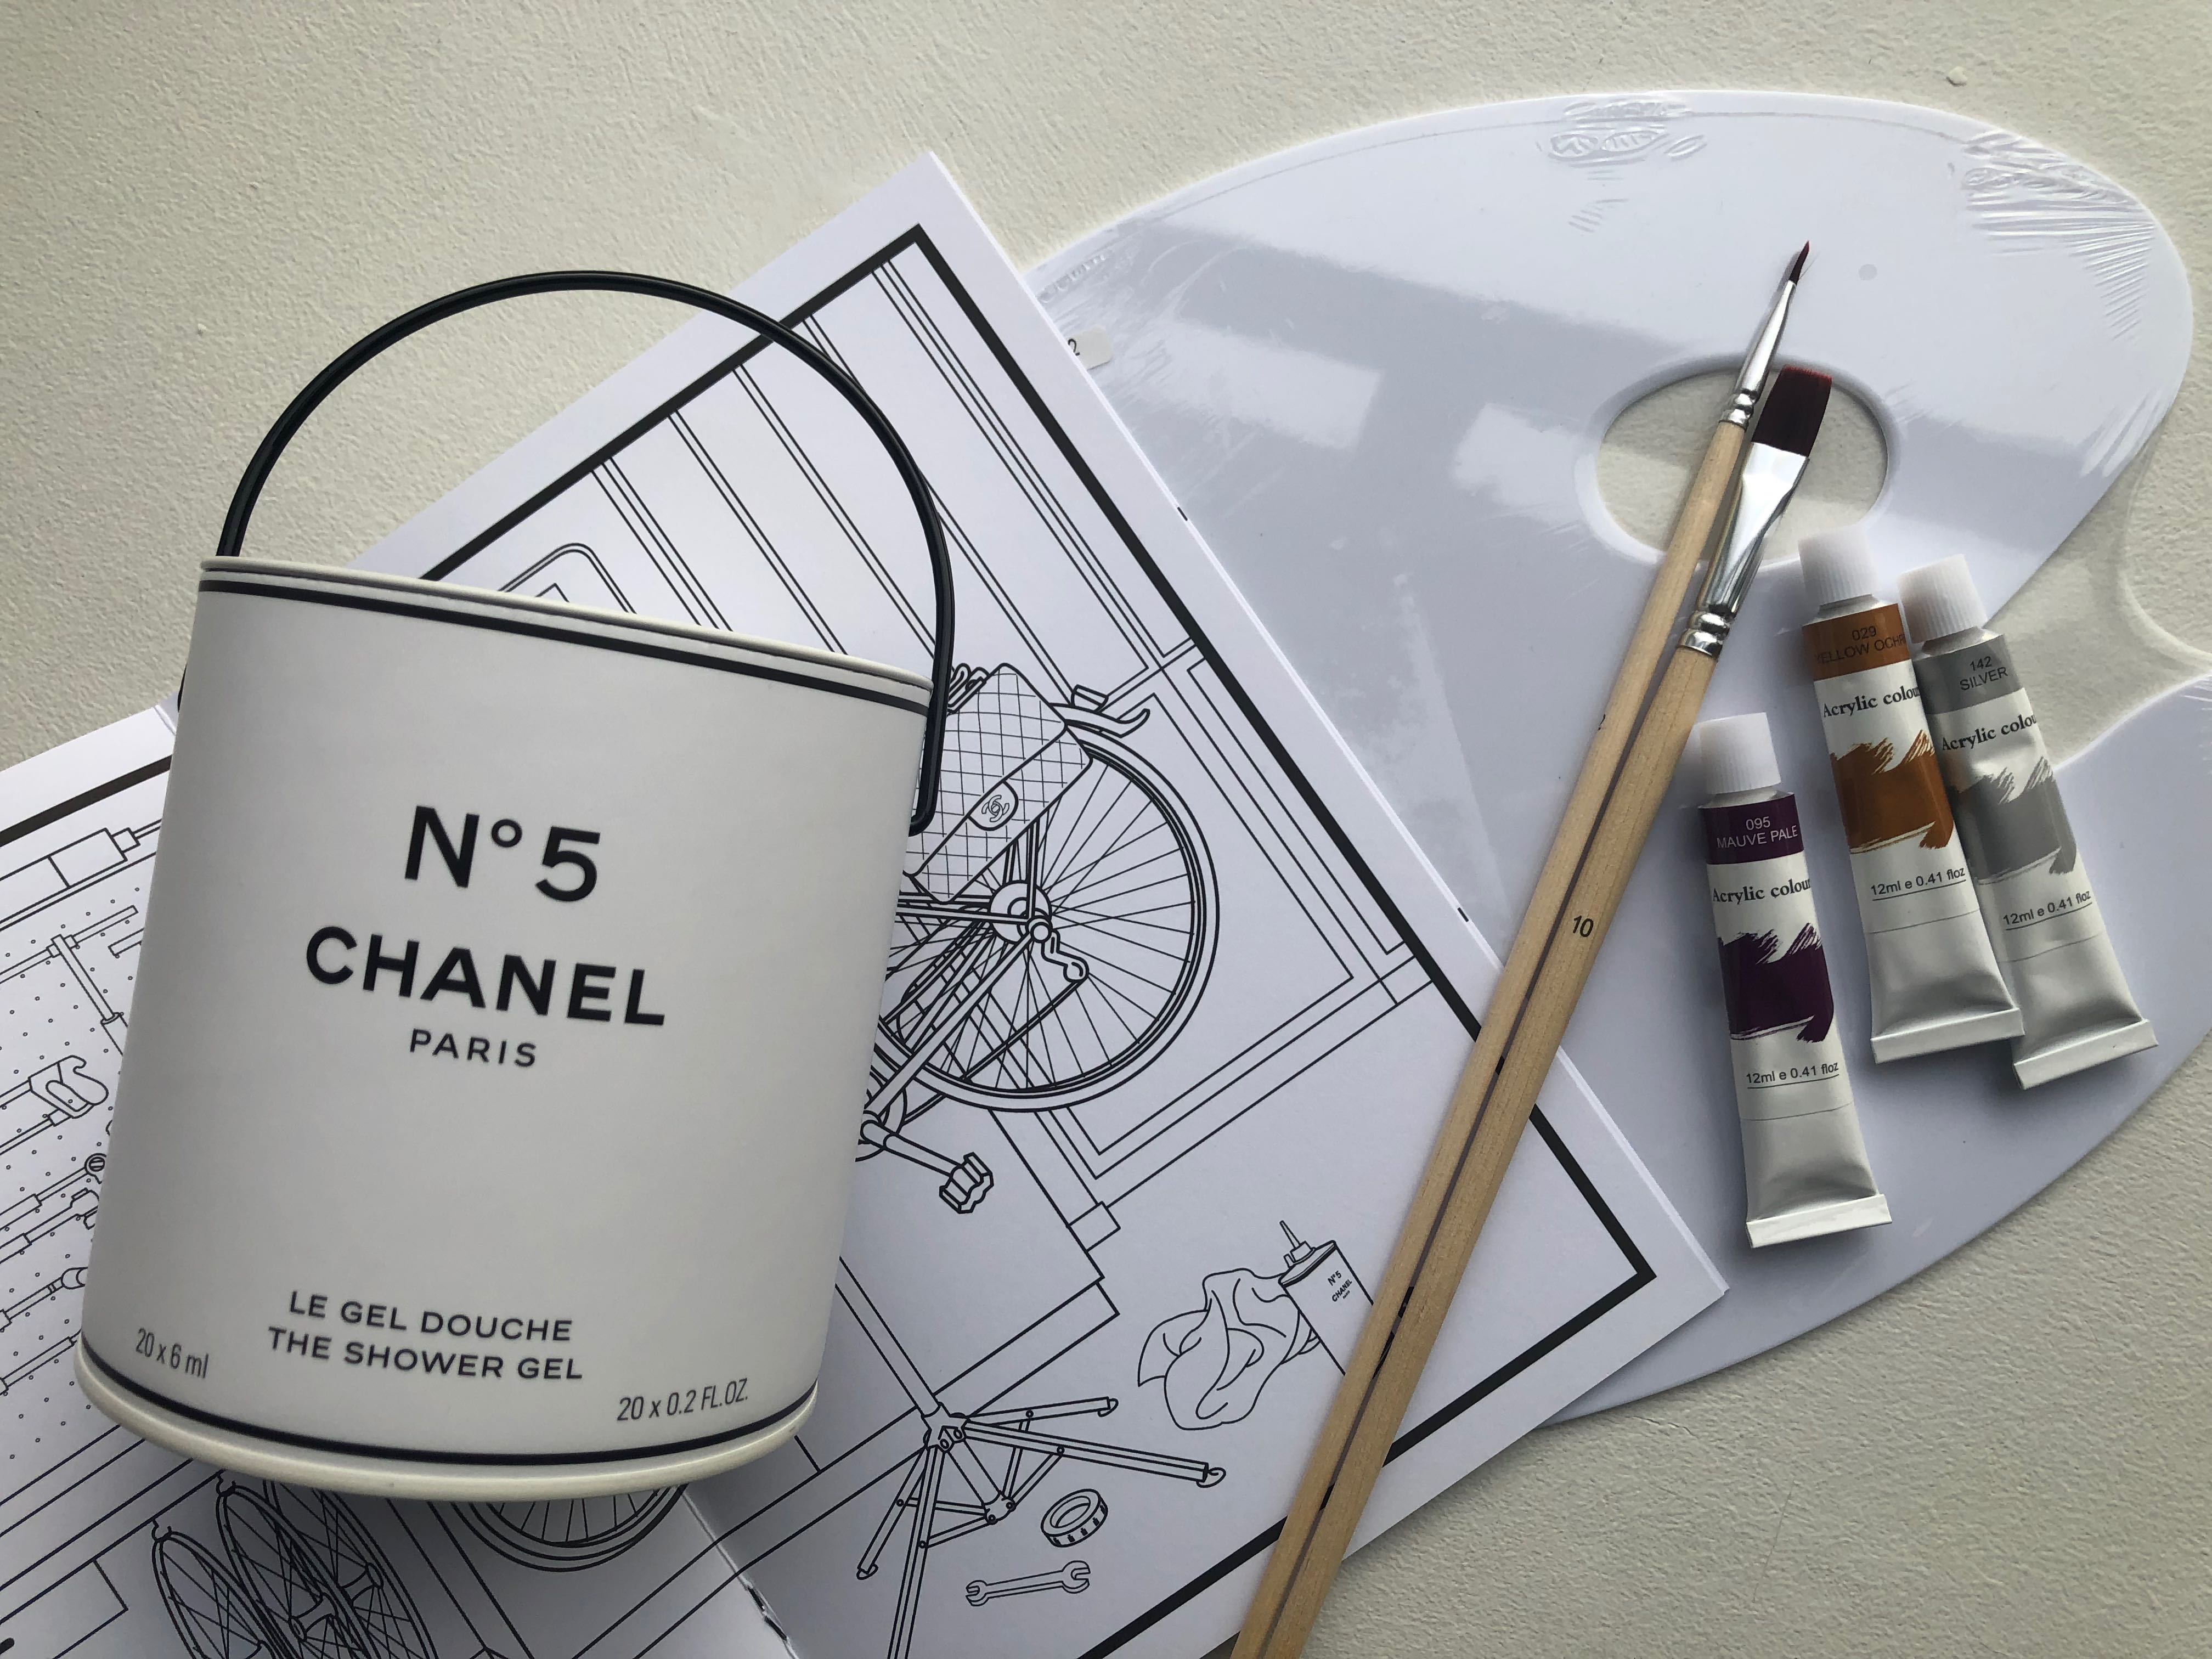 Chanel No5 Advent Calendar 2021 - Limited Edition - Contents